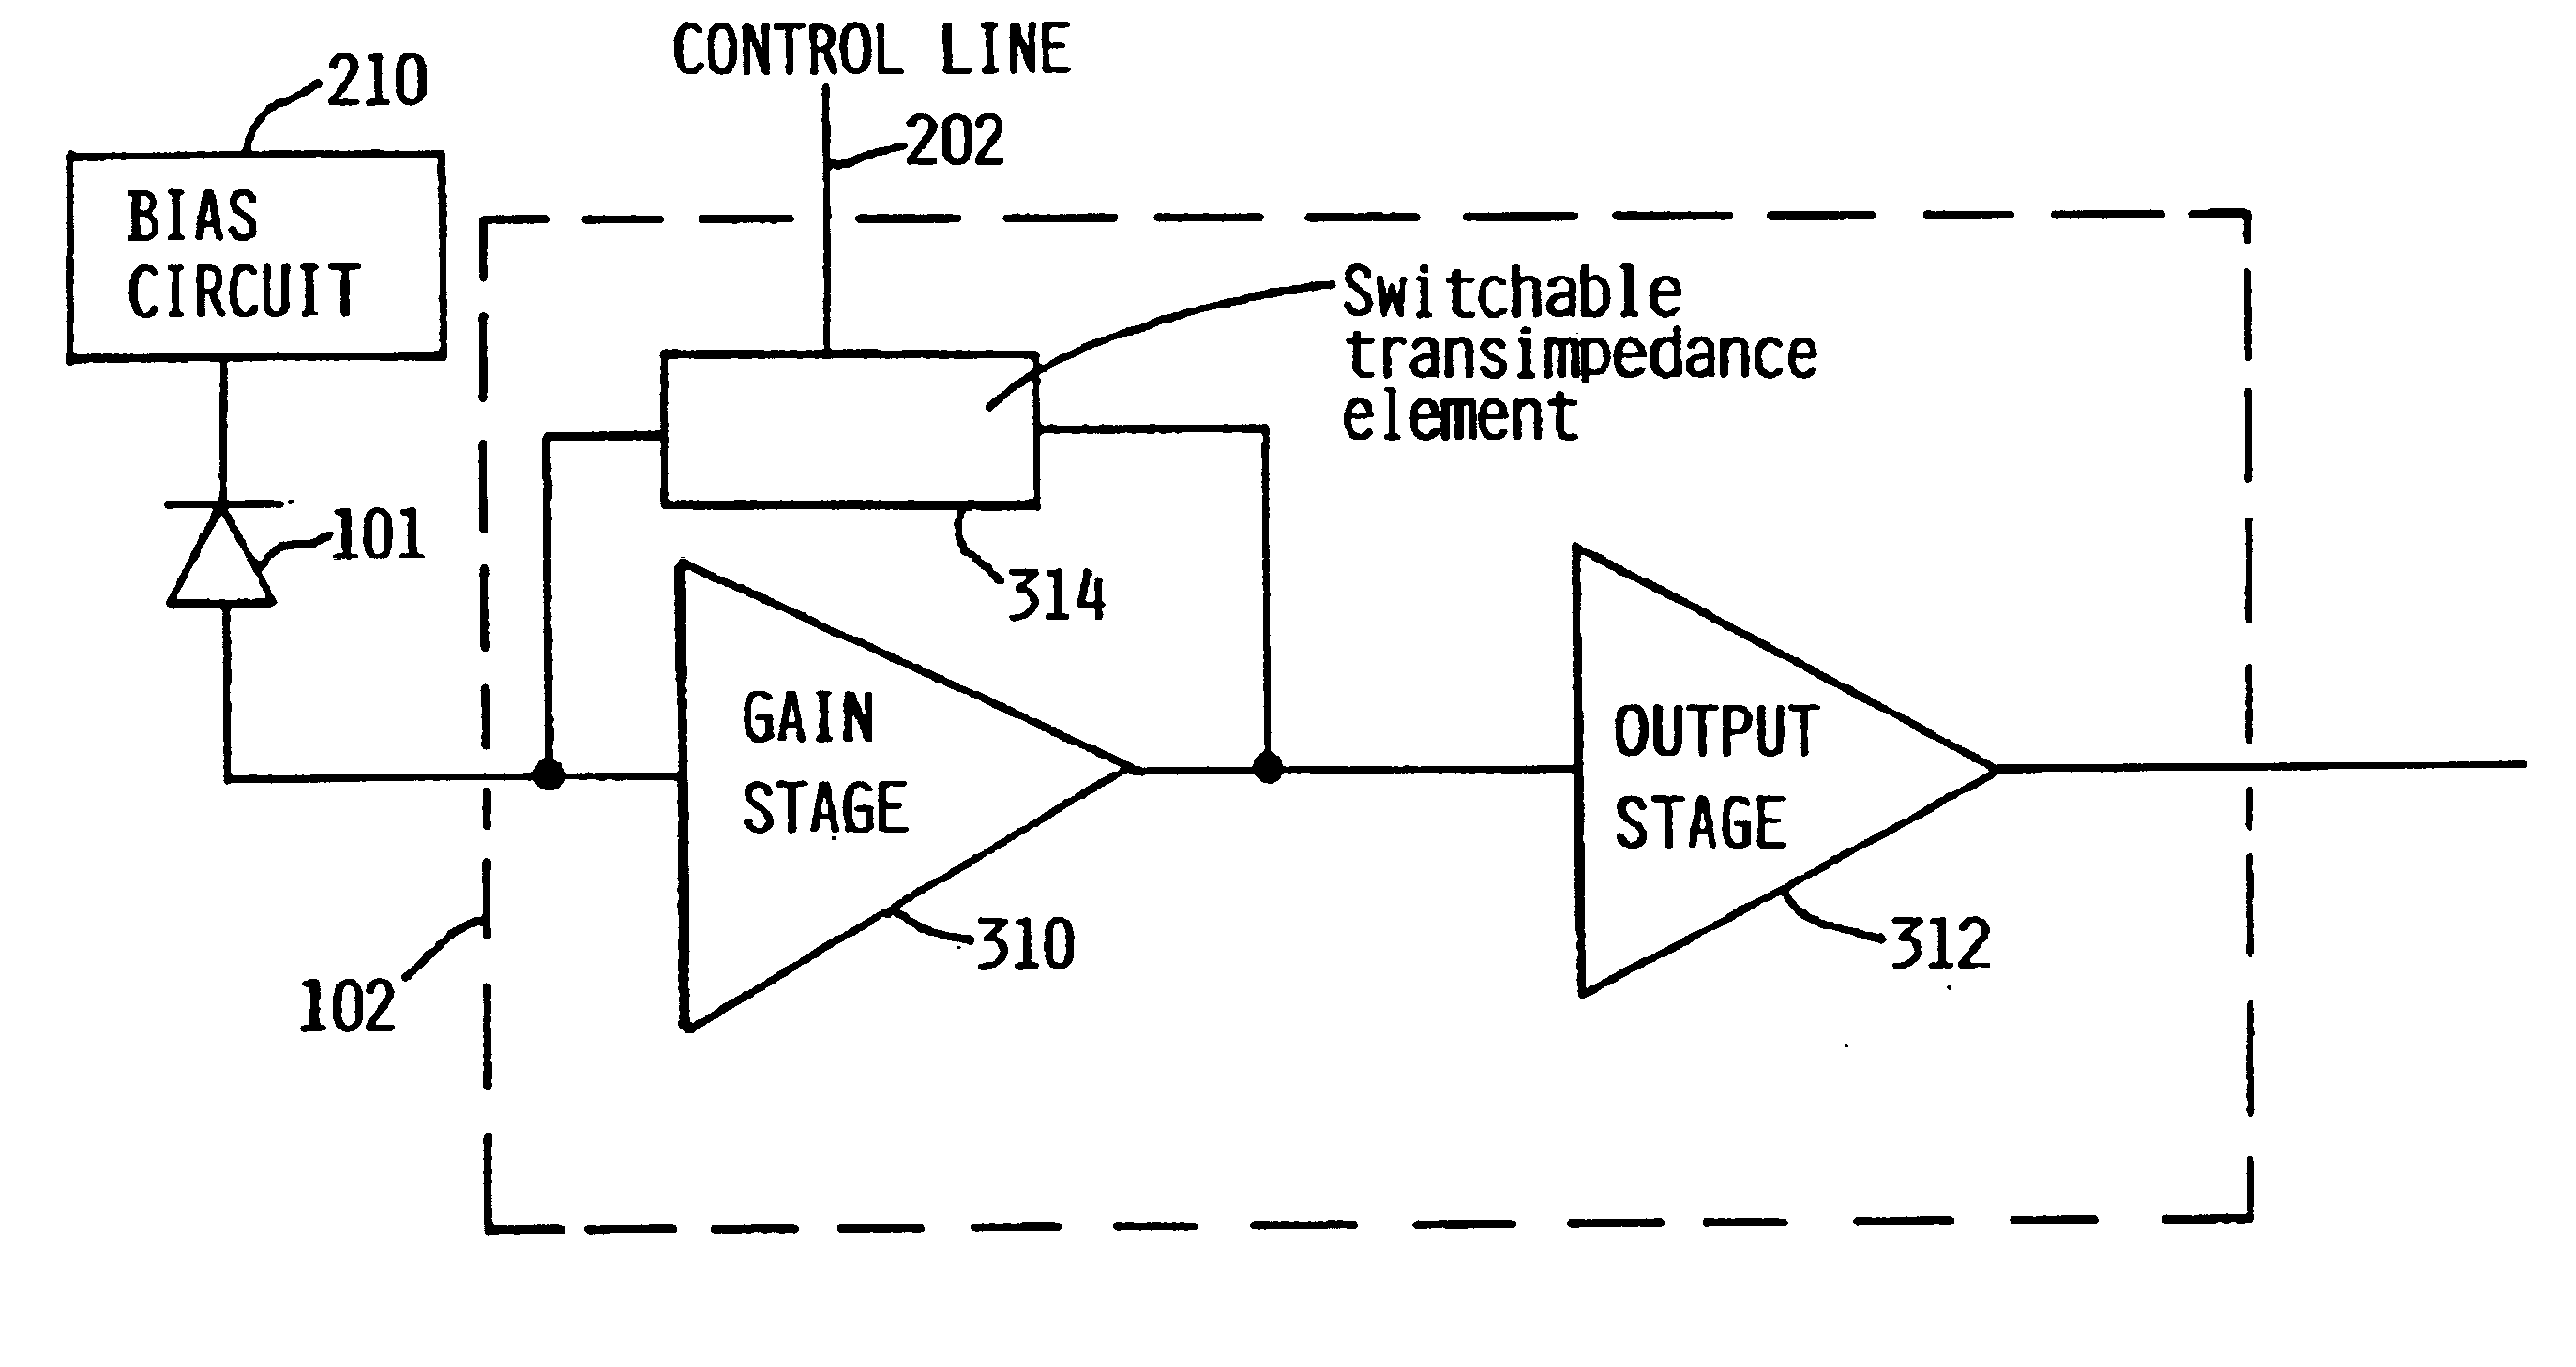 Switchable-bandwidth optical receiver